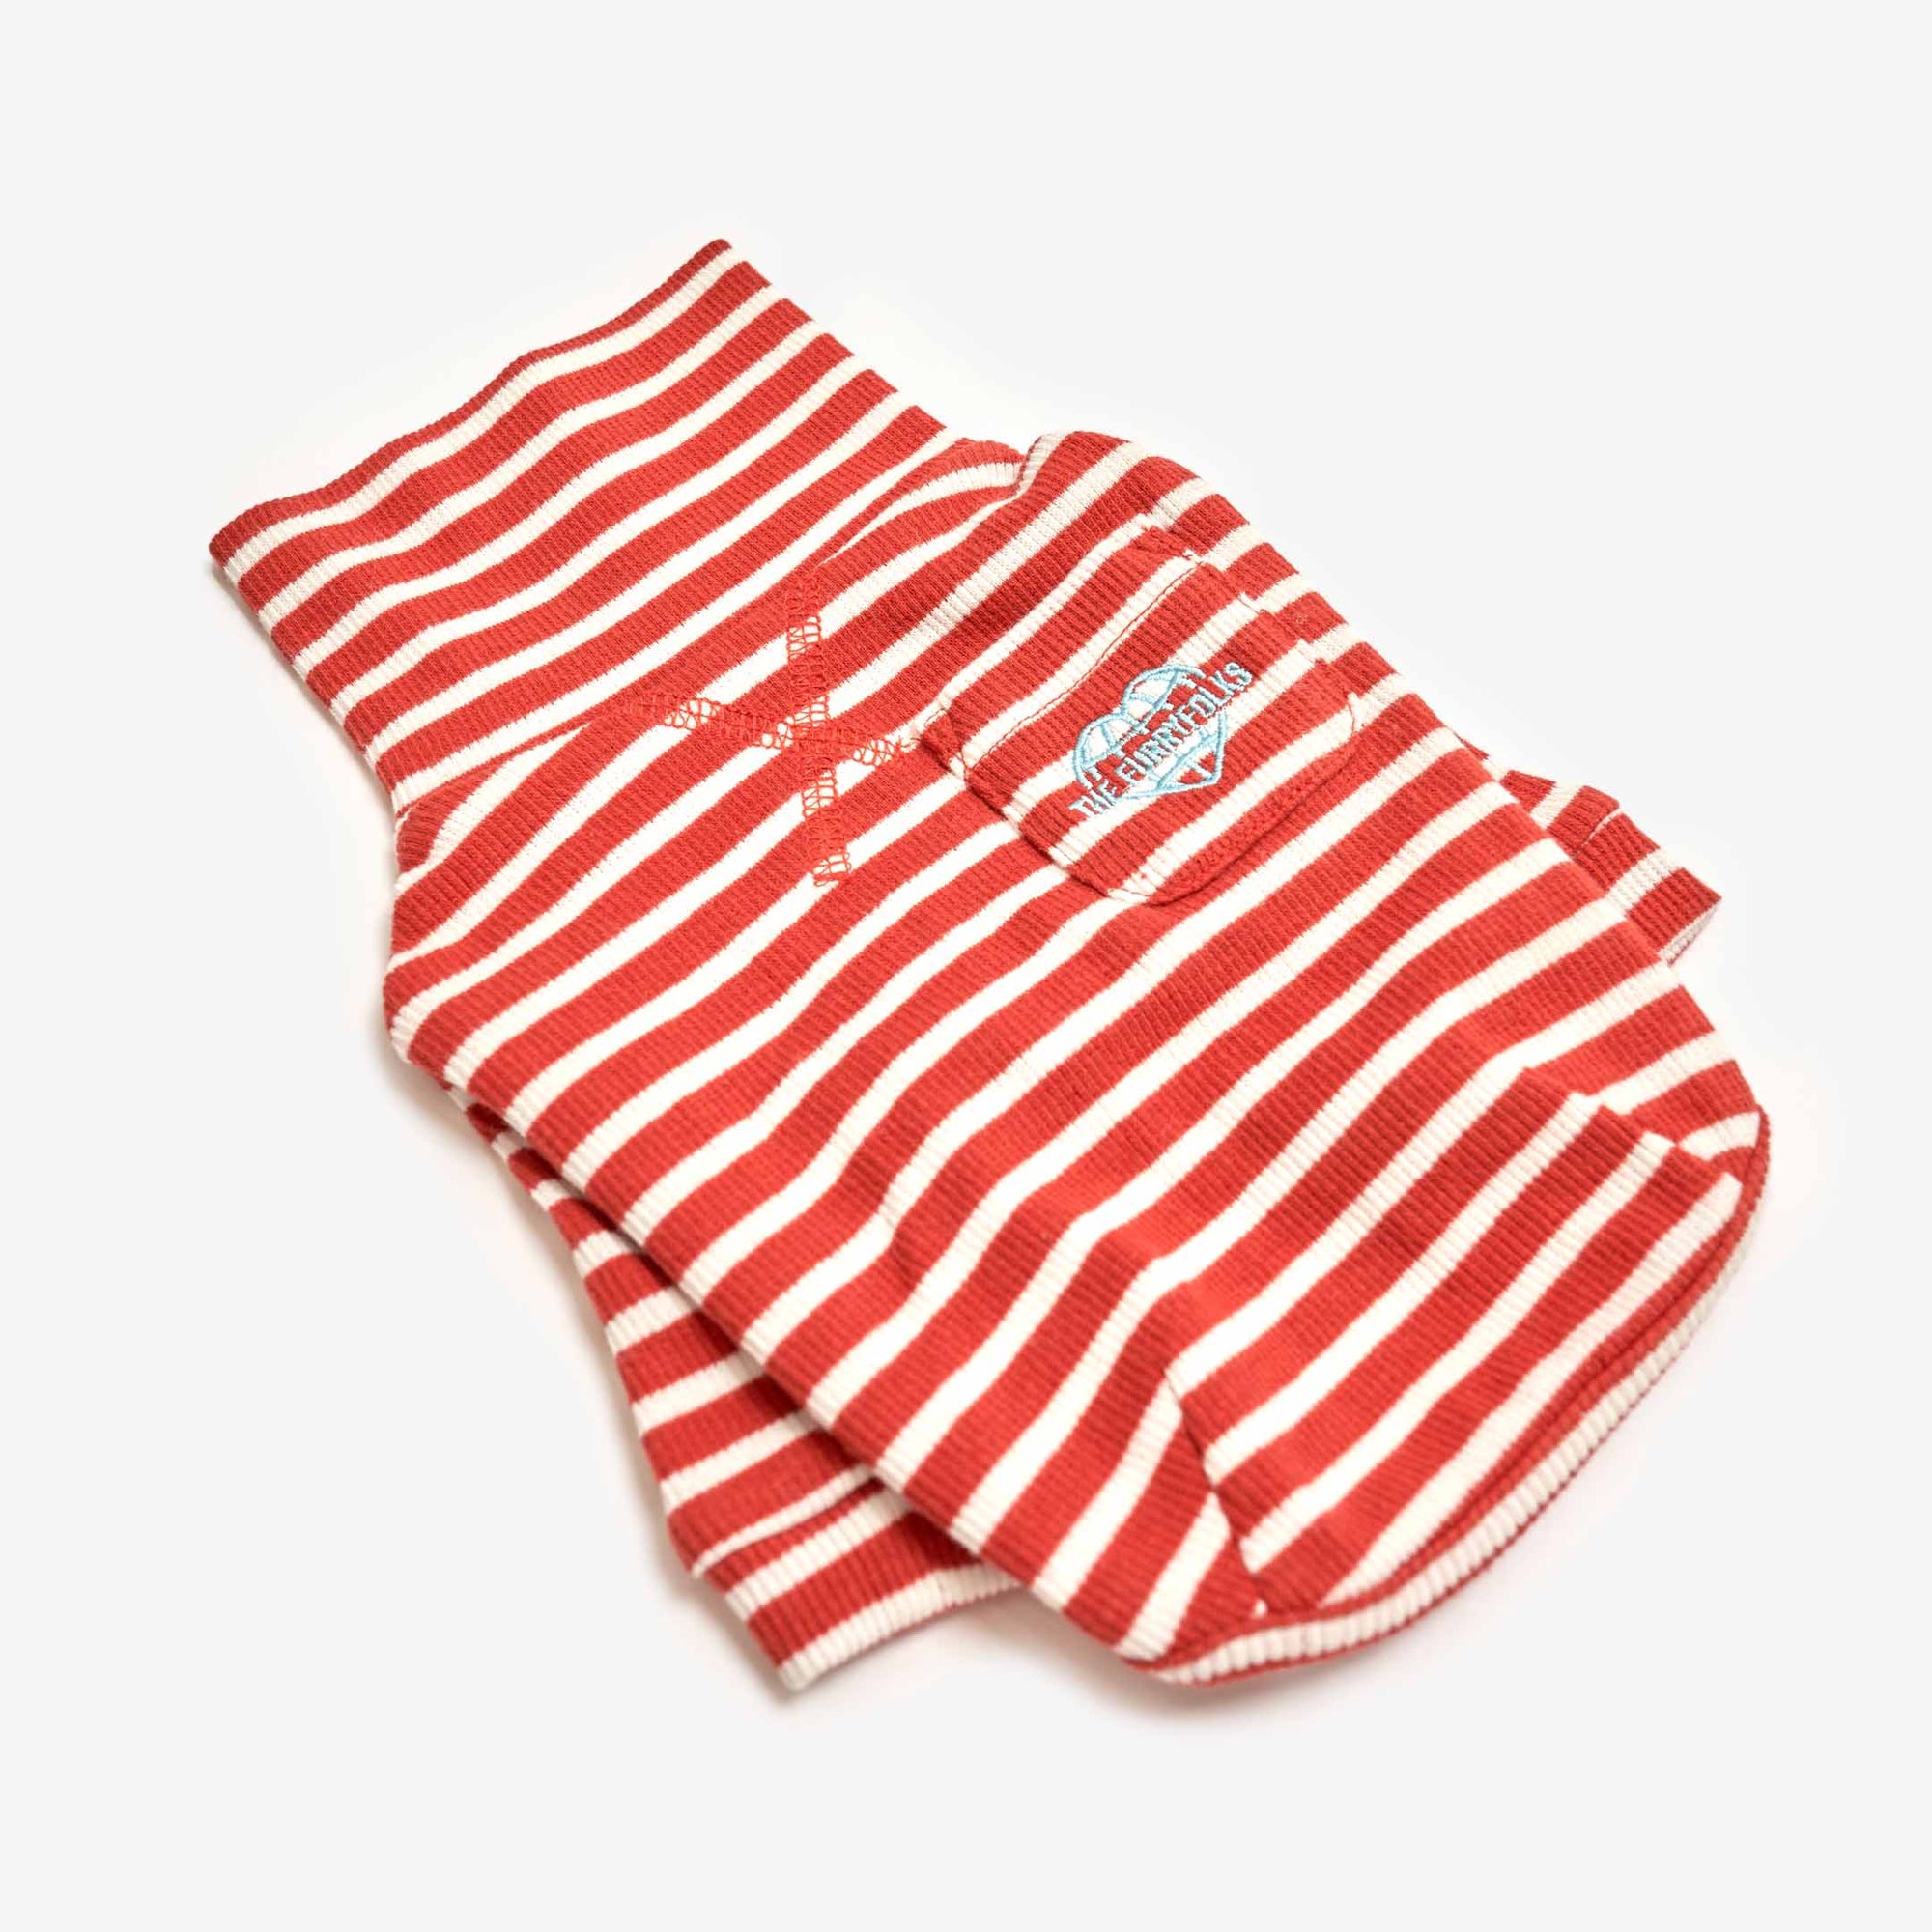 Rust & Ivory  striped dog shirt with heart logo, designed for a stylish and snug pet fit.